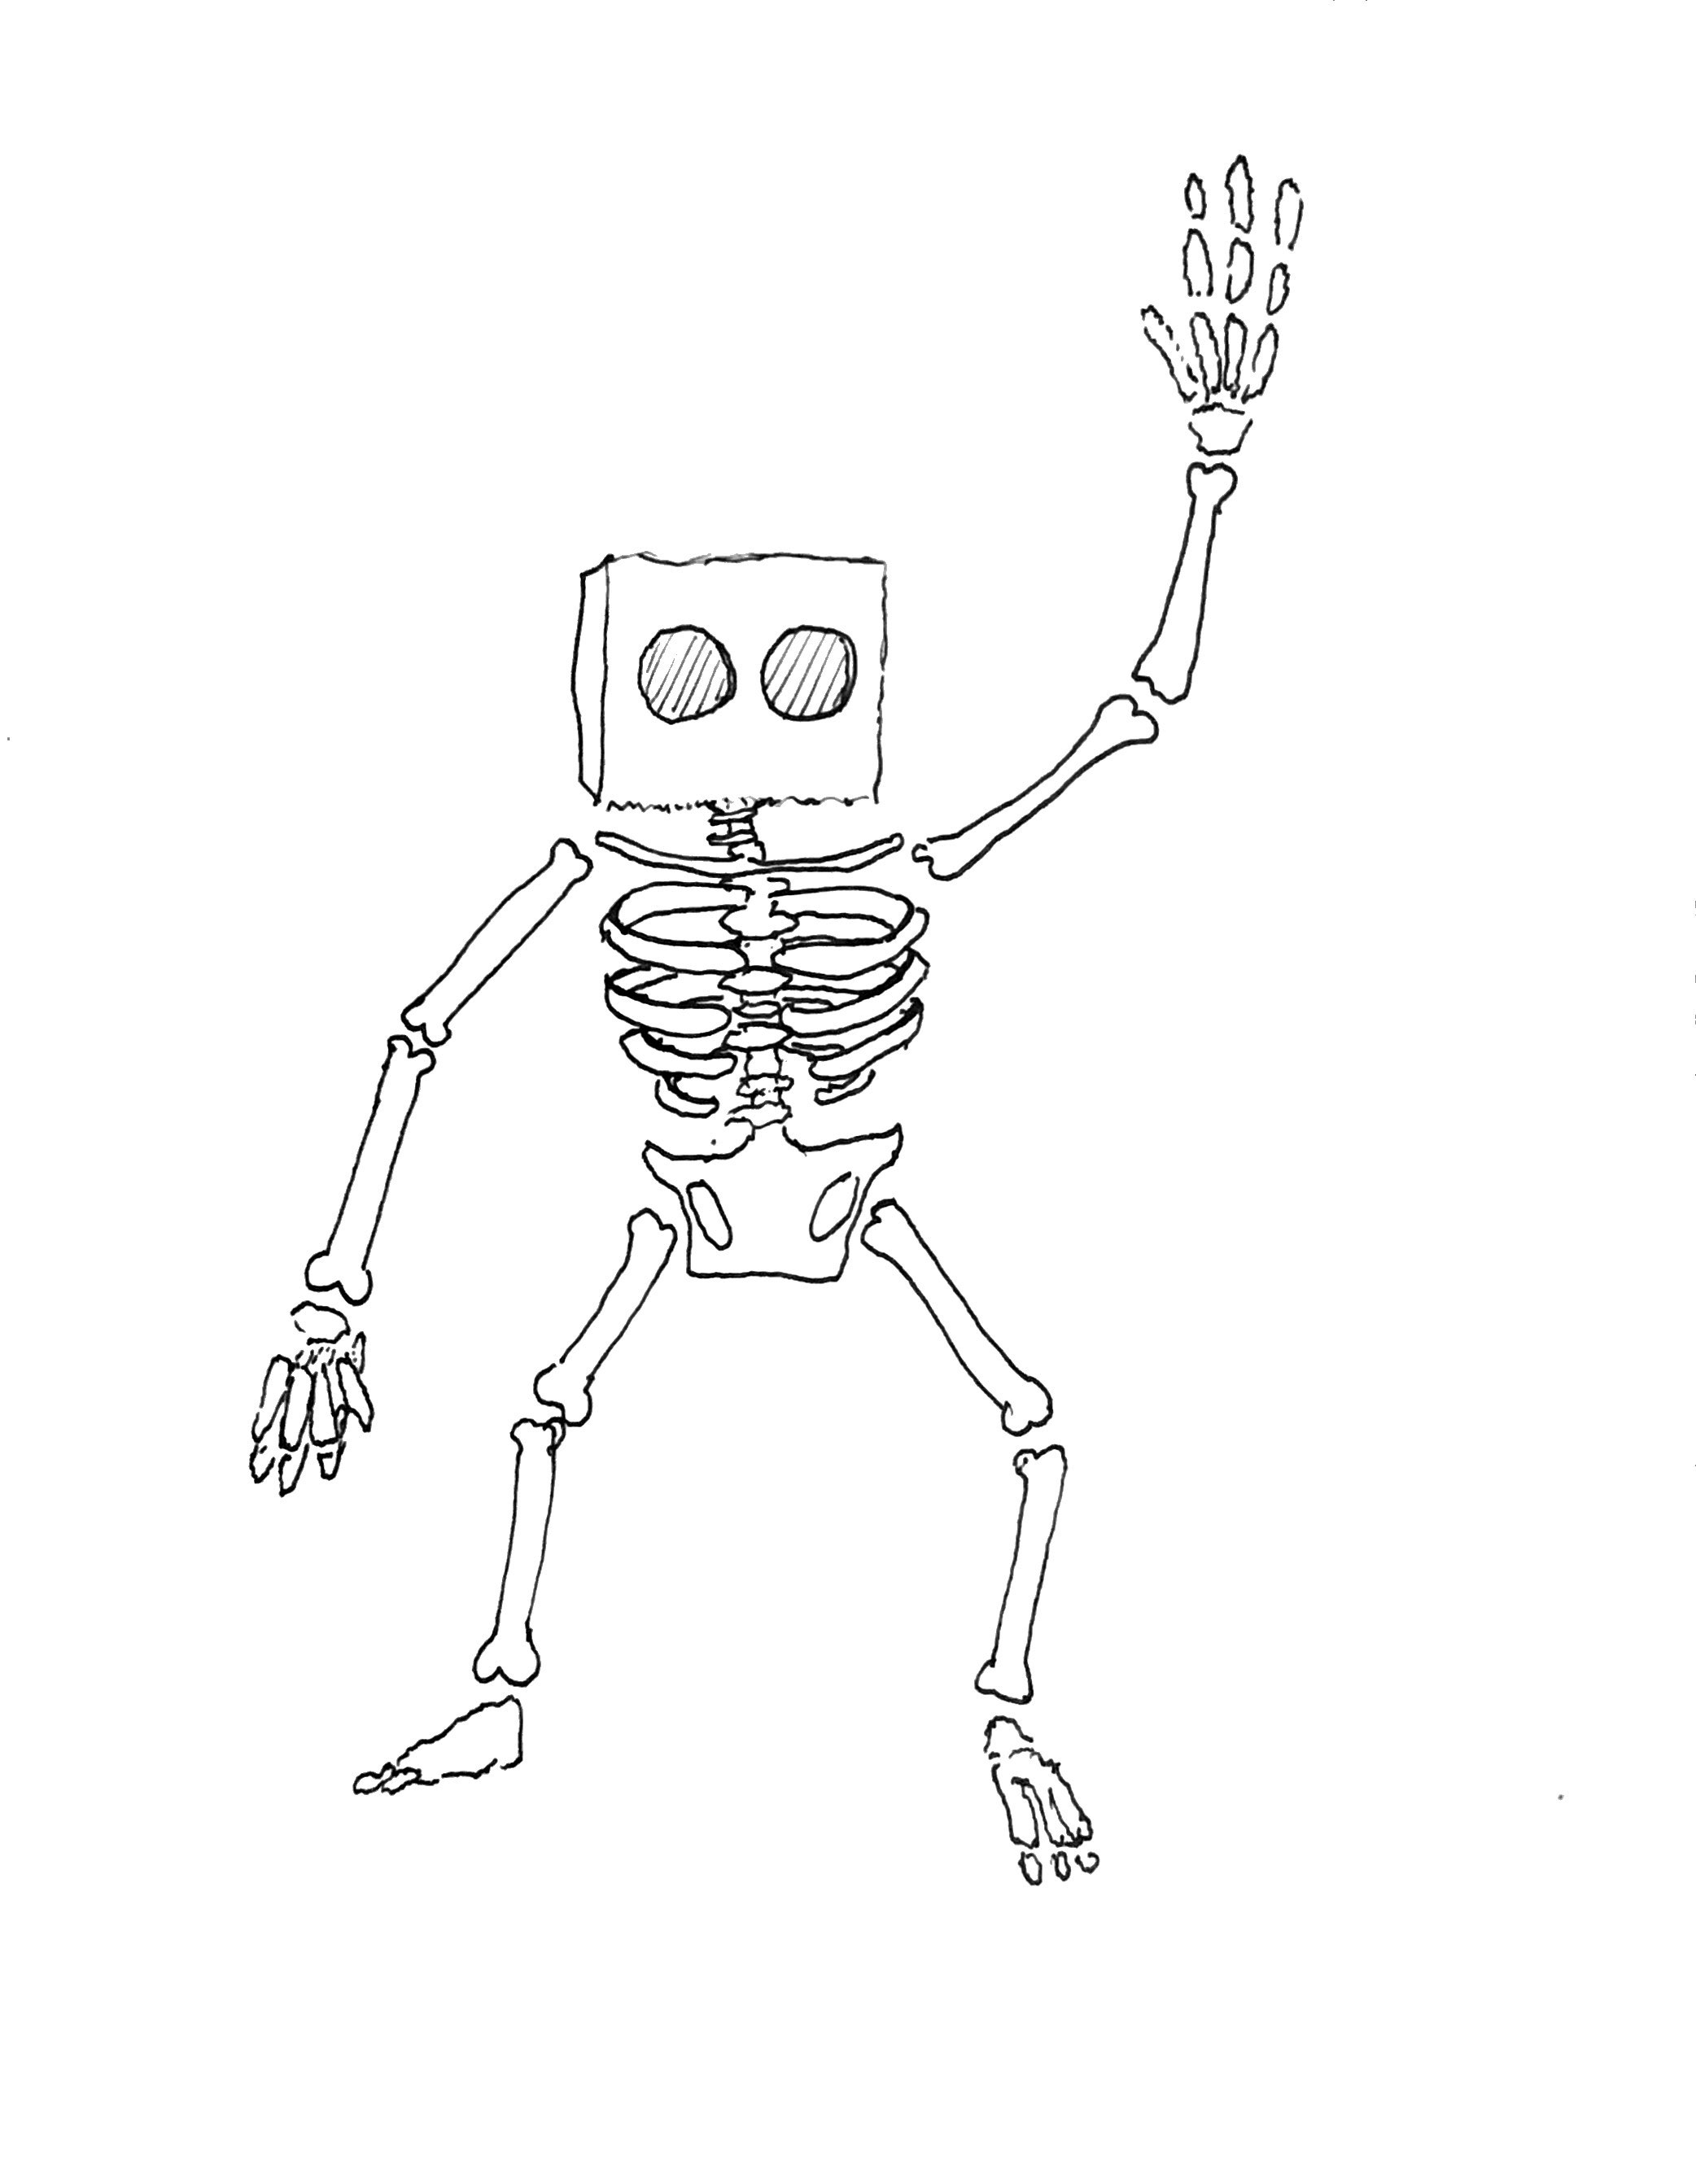 image from The Masked Skeleton